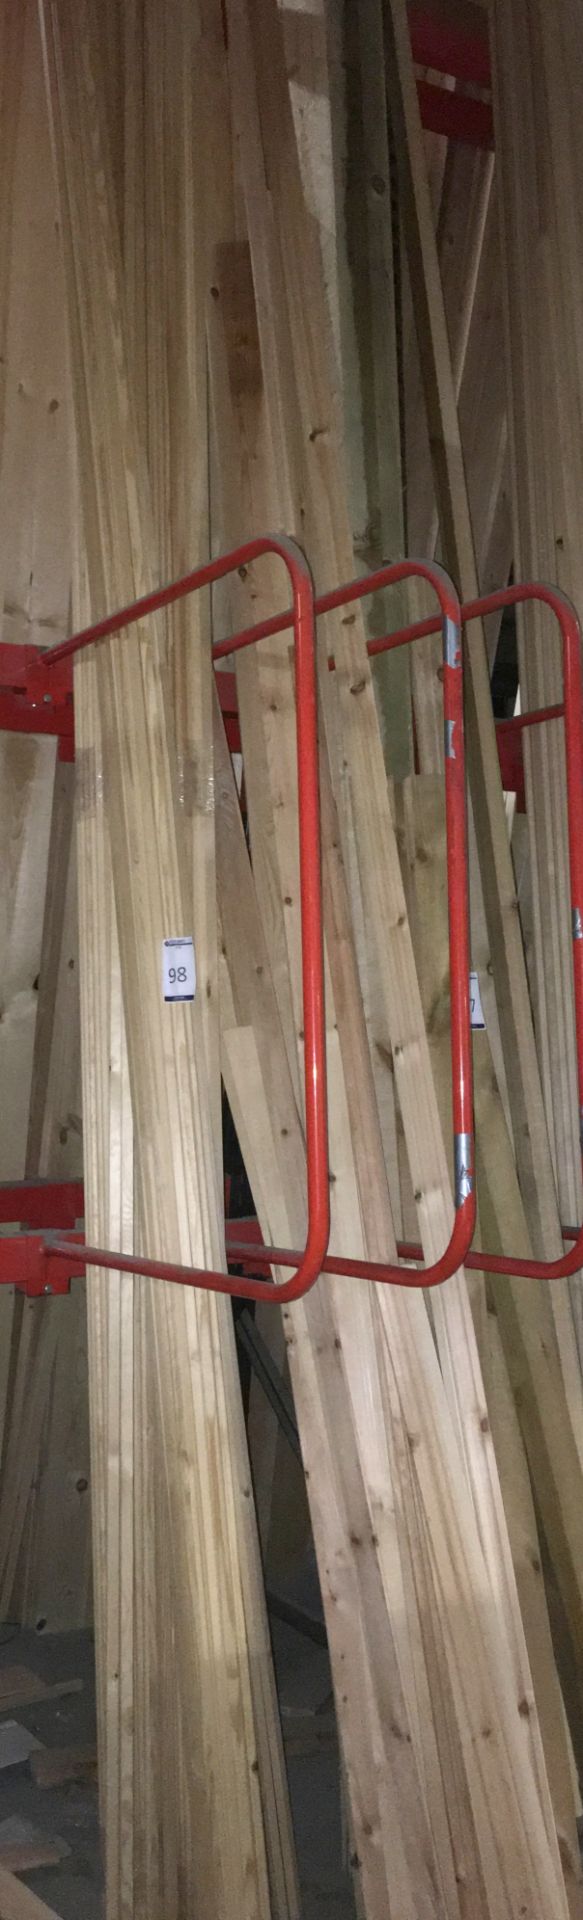 Architrave Lengths, Various Dimensions & Profiles (Contents of 2 Dividers) (located at Tooting,